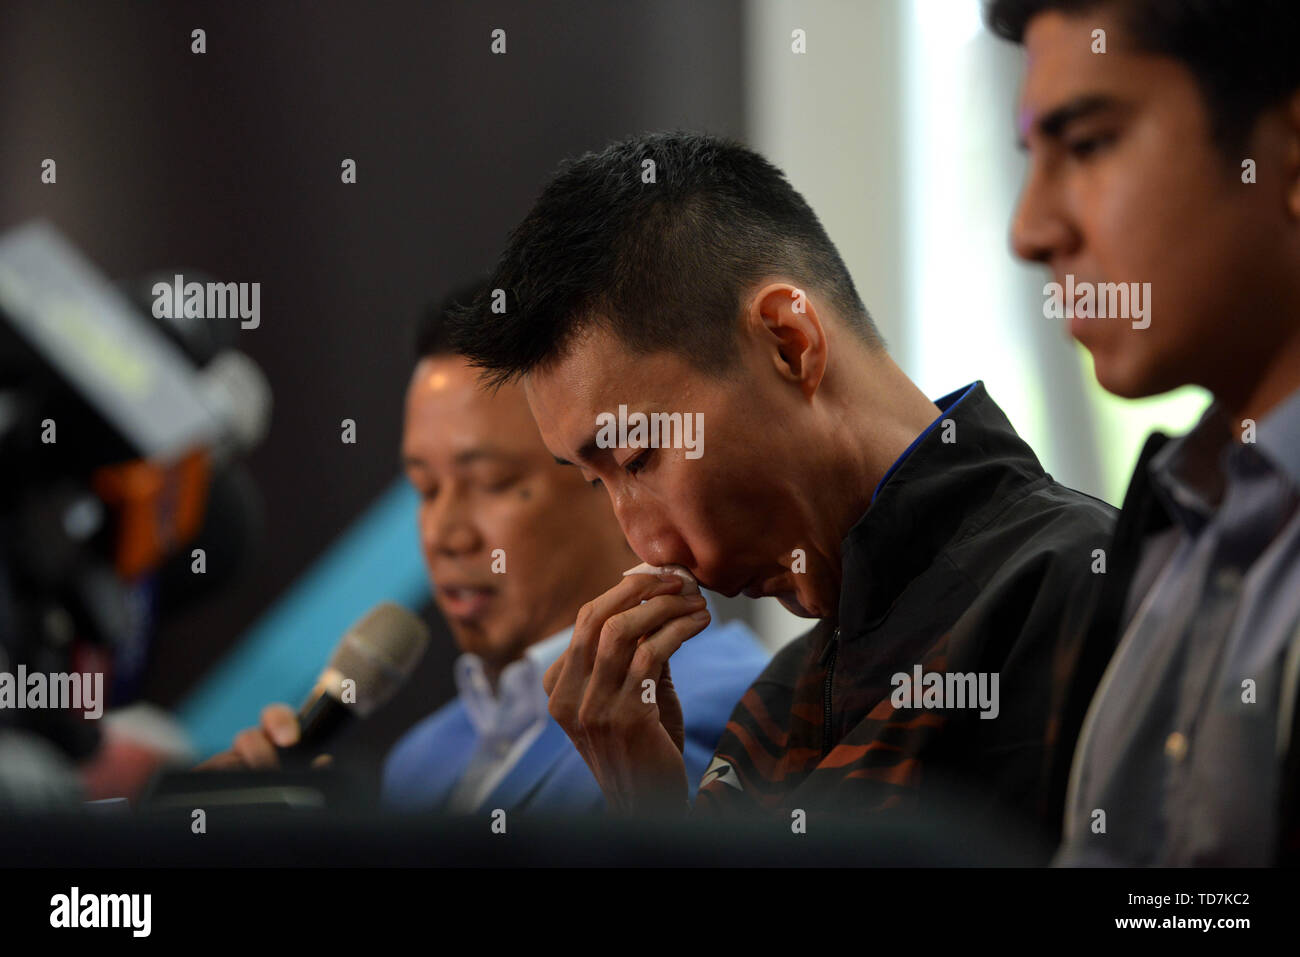 Putrajaya, Malaysia. 13th June, 2019. Malaysia's badminton player Lee Chong Wei (C) reacts during a news conference to announce his retirement in Putrajaya, Malaysia, June 13, 2019. Credit: Chong Voon Chung/Xinhua/Alamy Live News Stock Photo